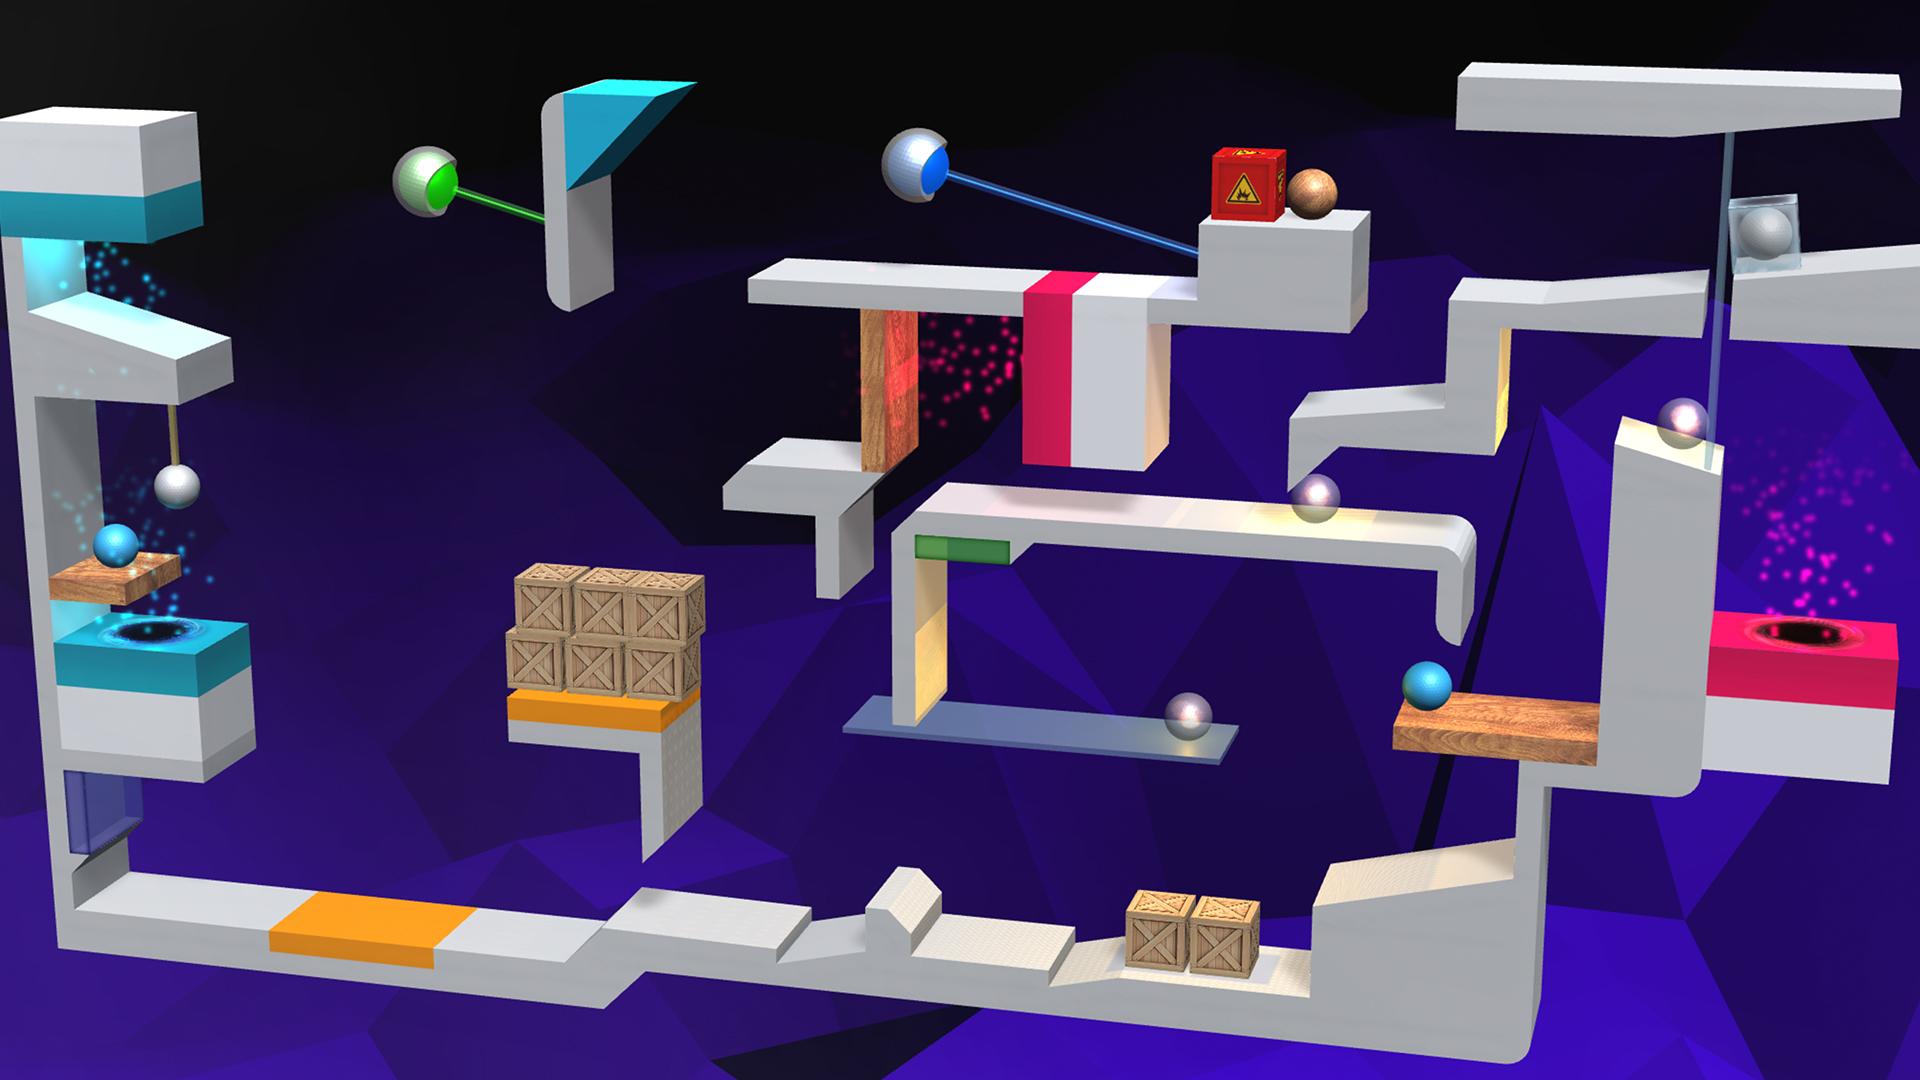 download the last version for ios Heart Box - free physics puzzles game